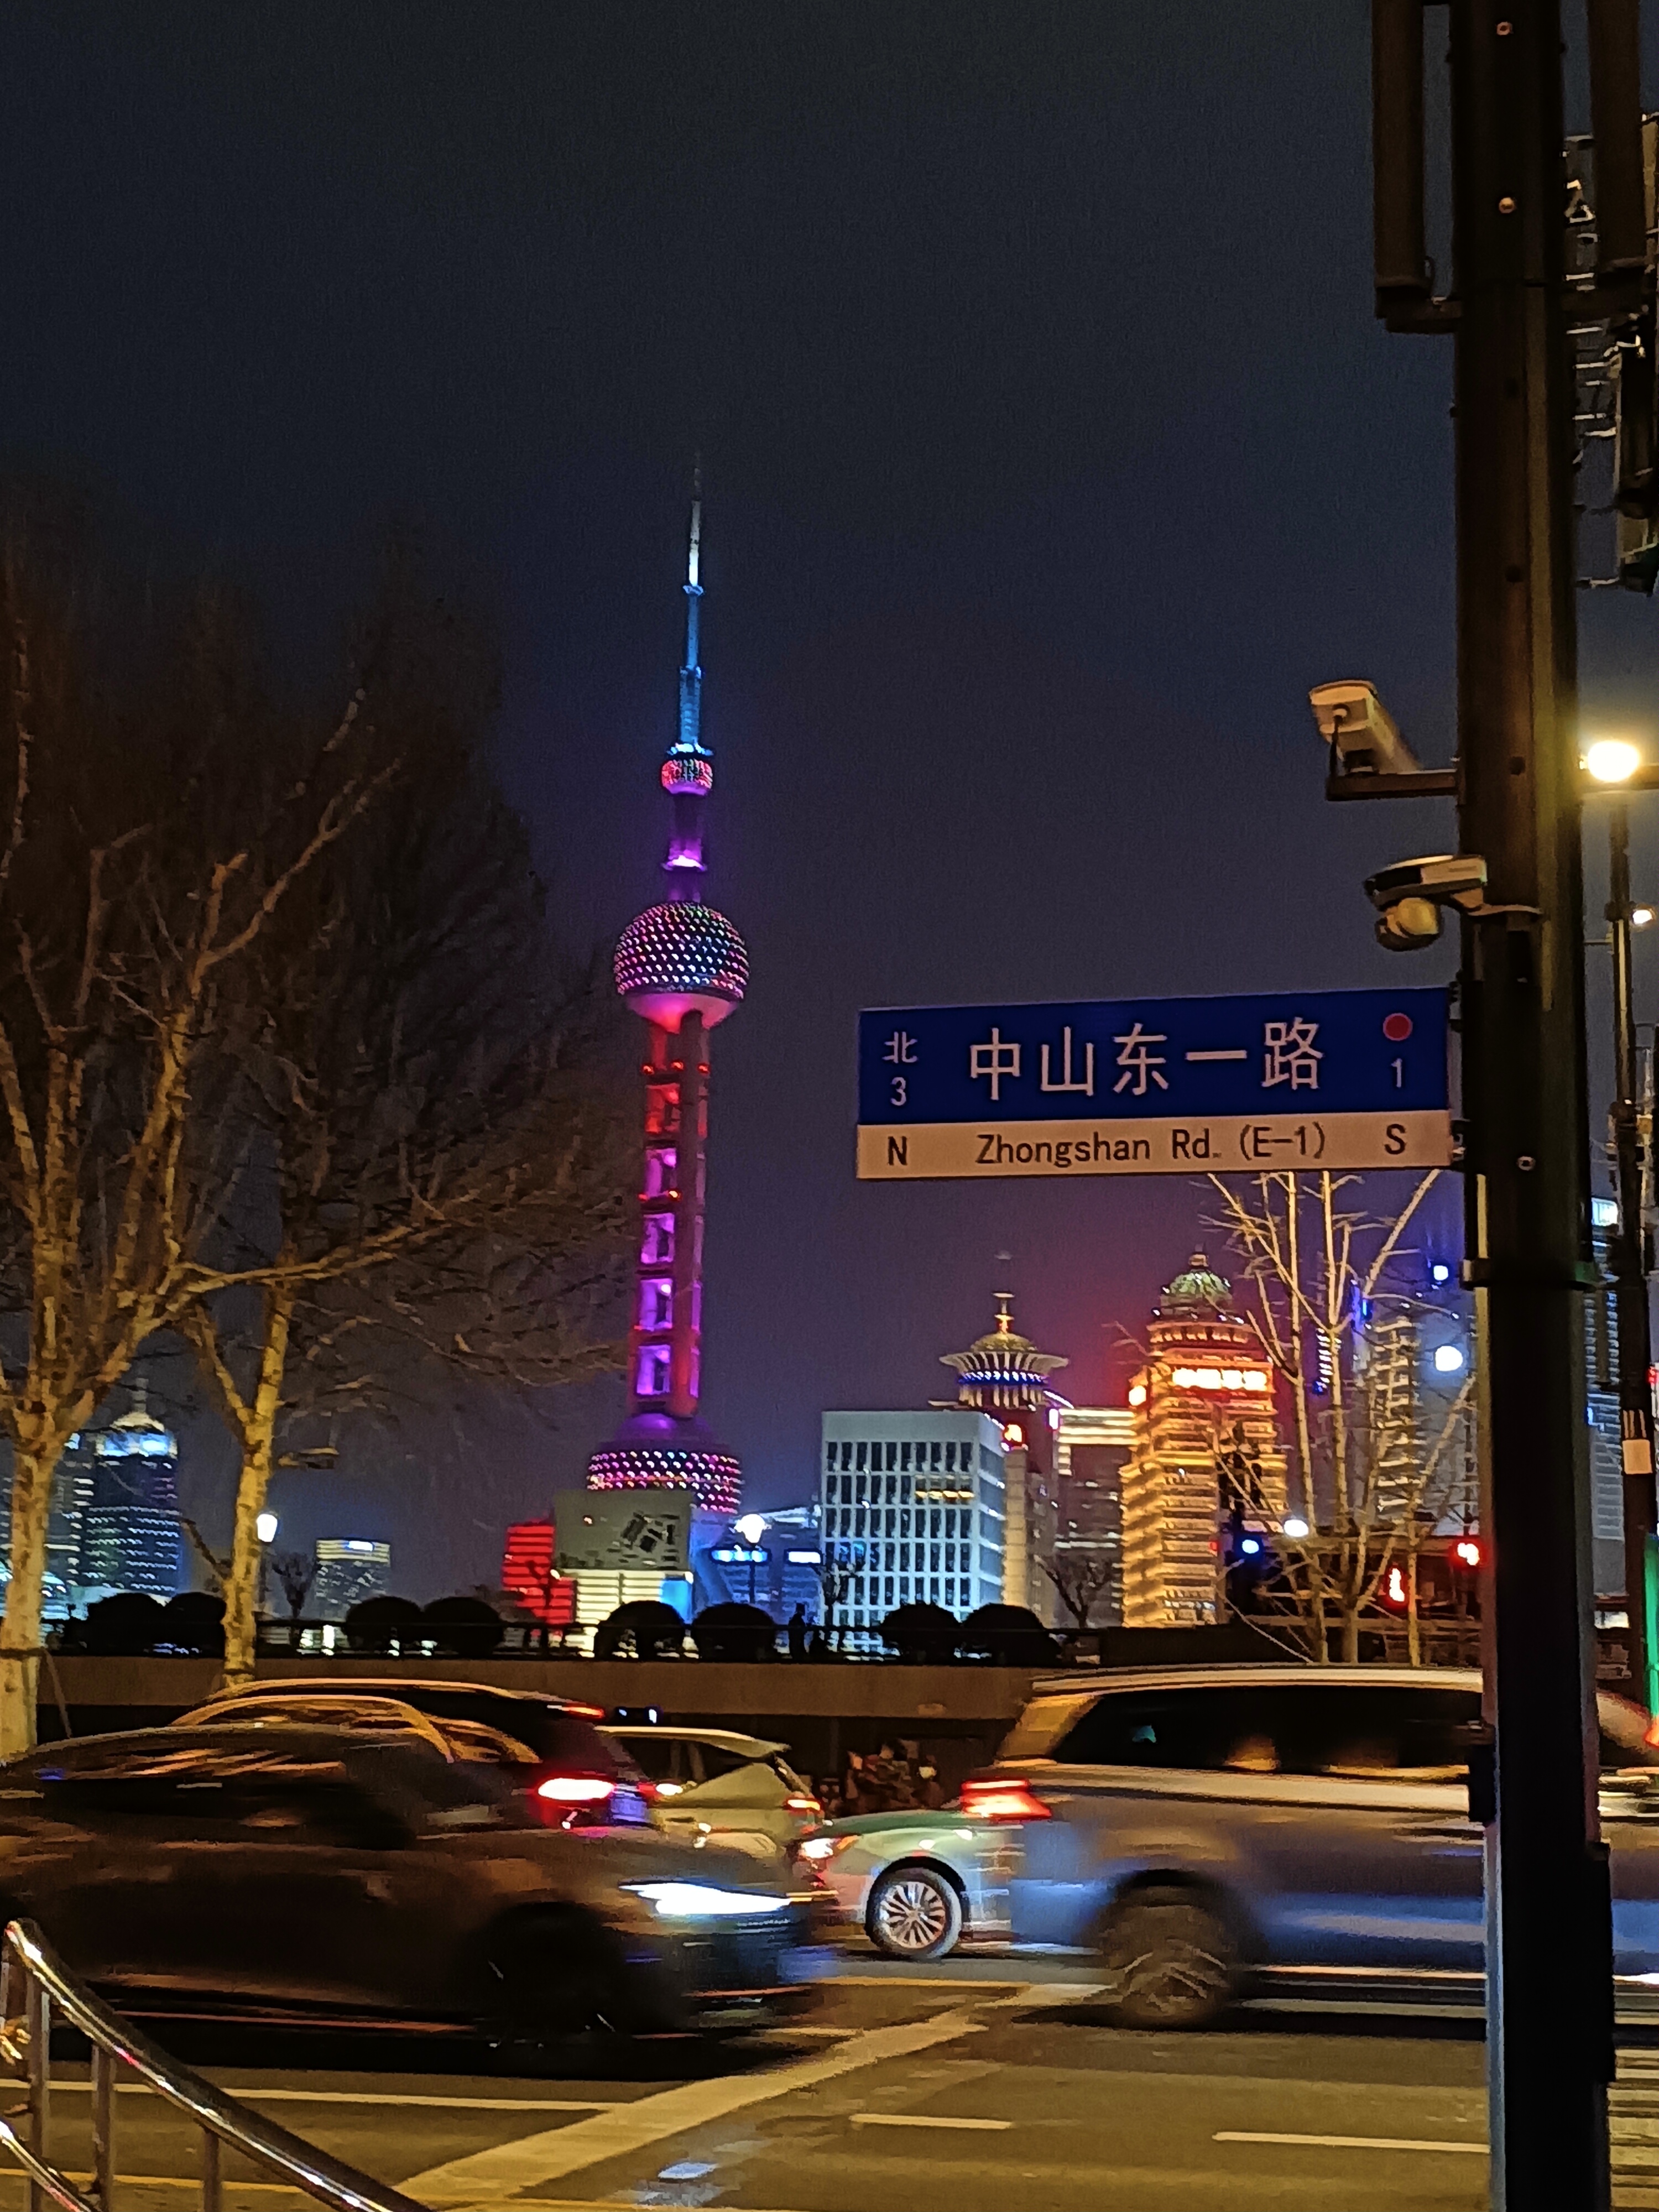 Record my intership experience in Shanghai